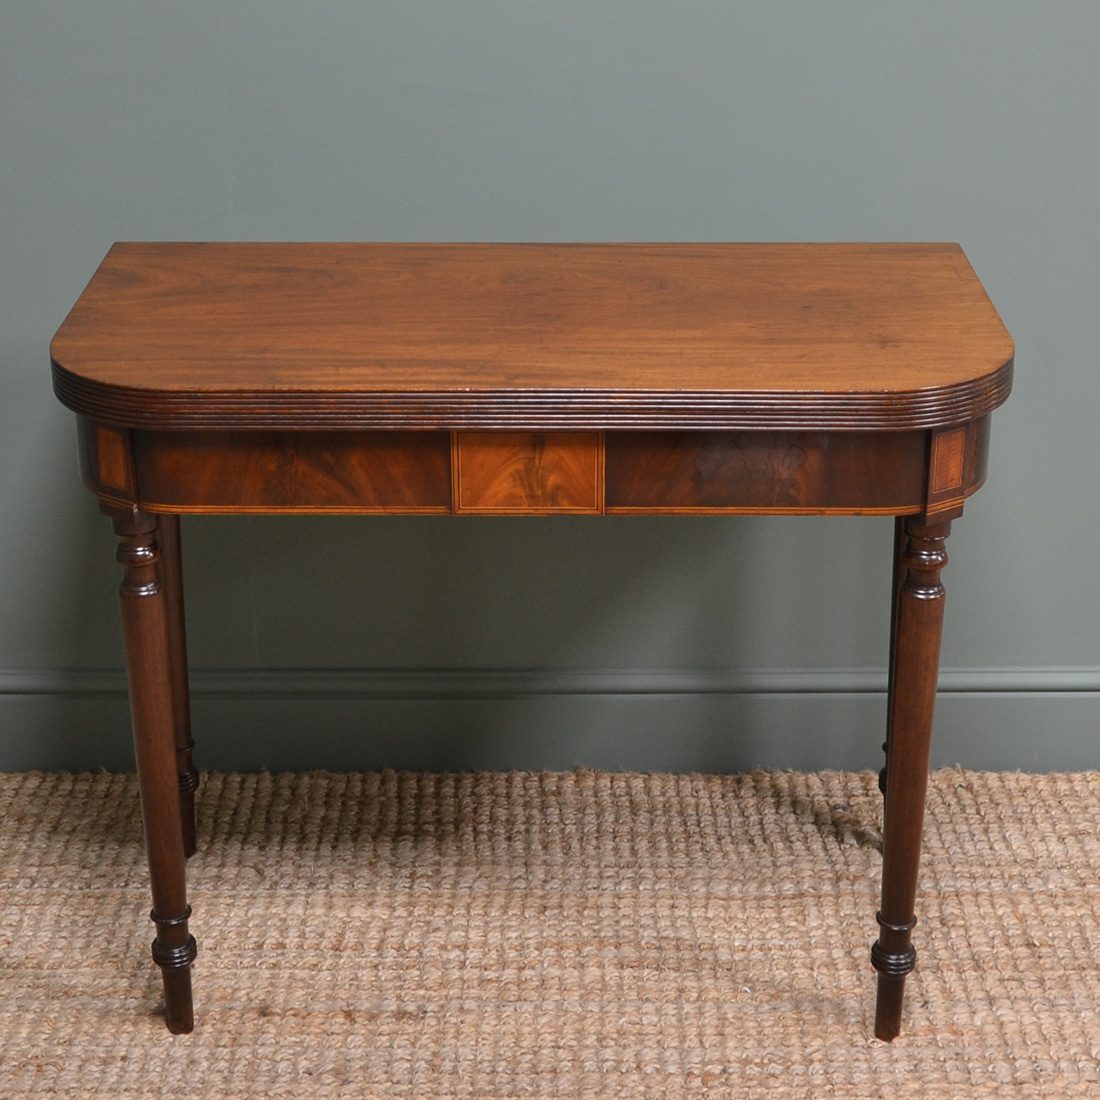 Beautiful Victorian Mahogany Antique Games Table by A Blain & Son, Liverpool